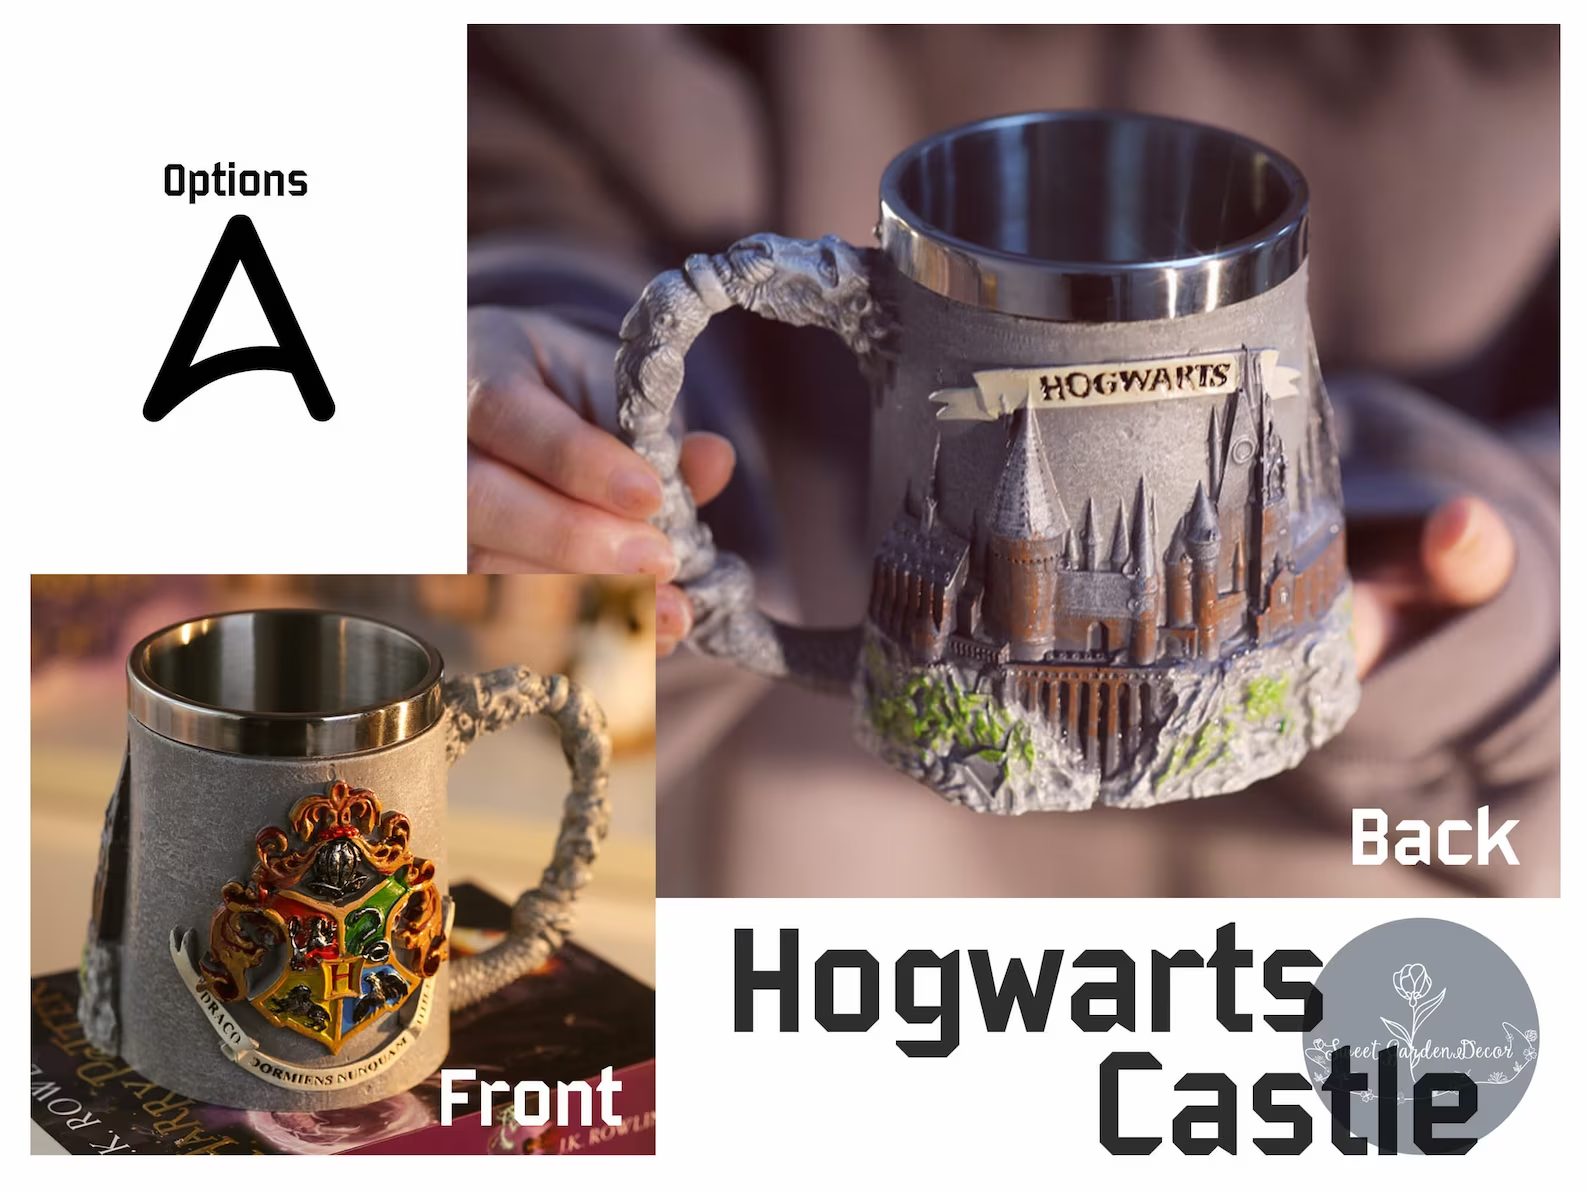 2 pictures showing the front and back of the Hogwarts castle and crest